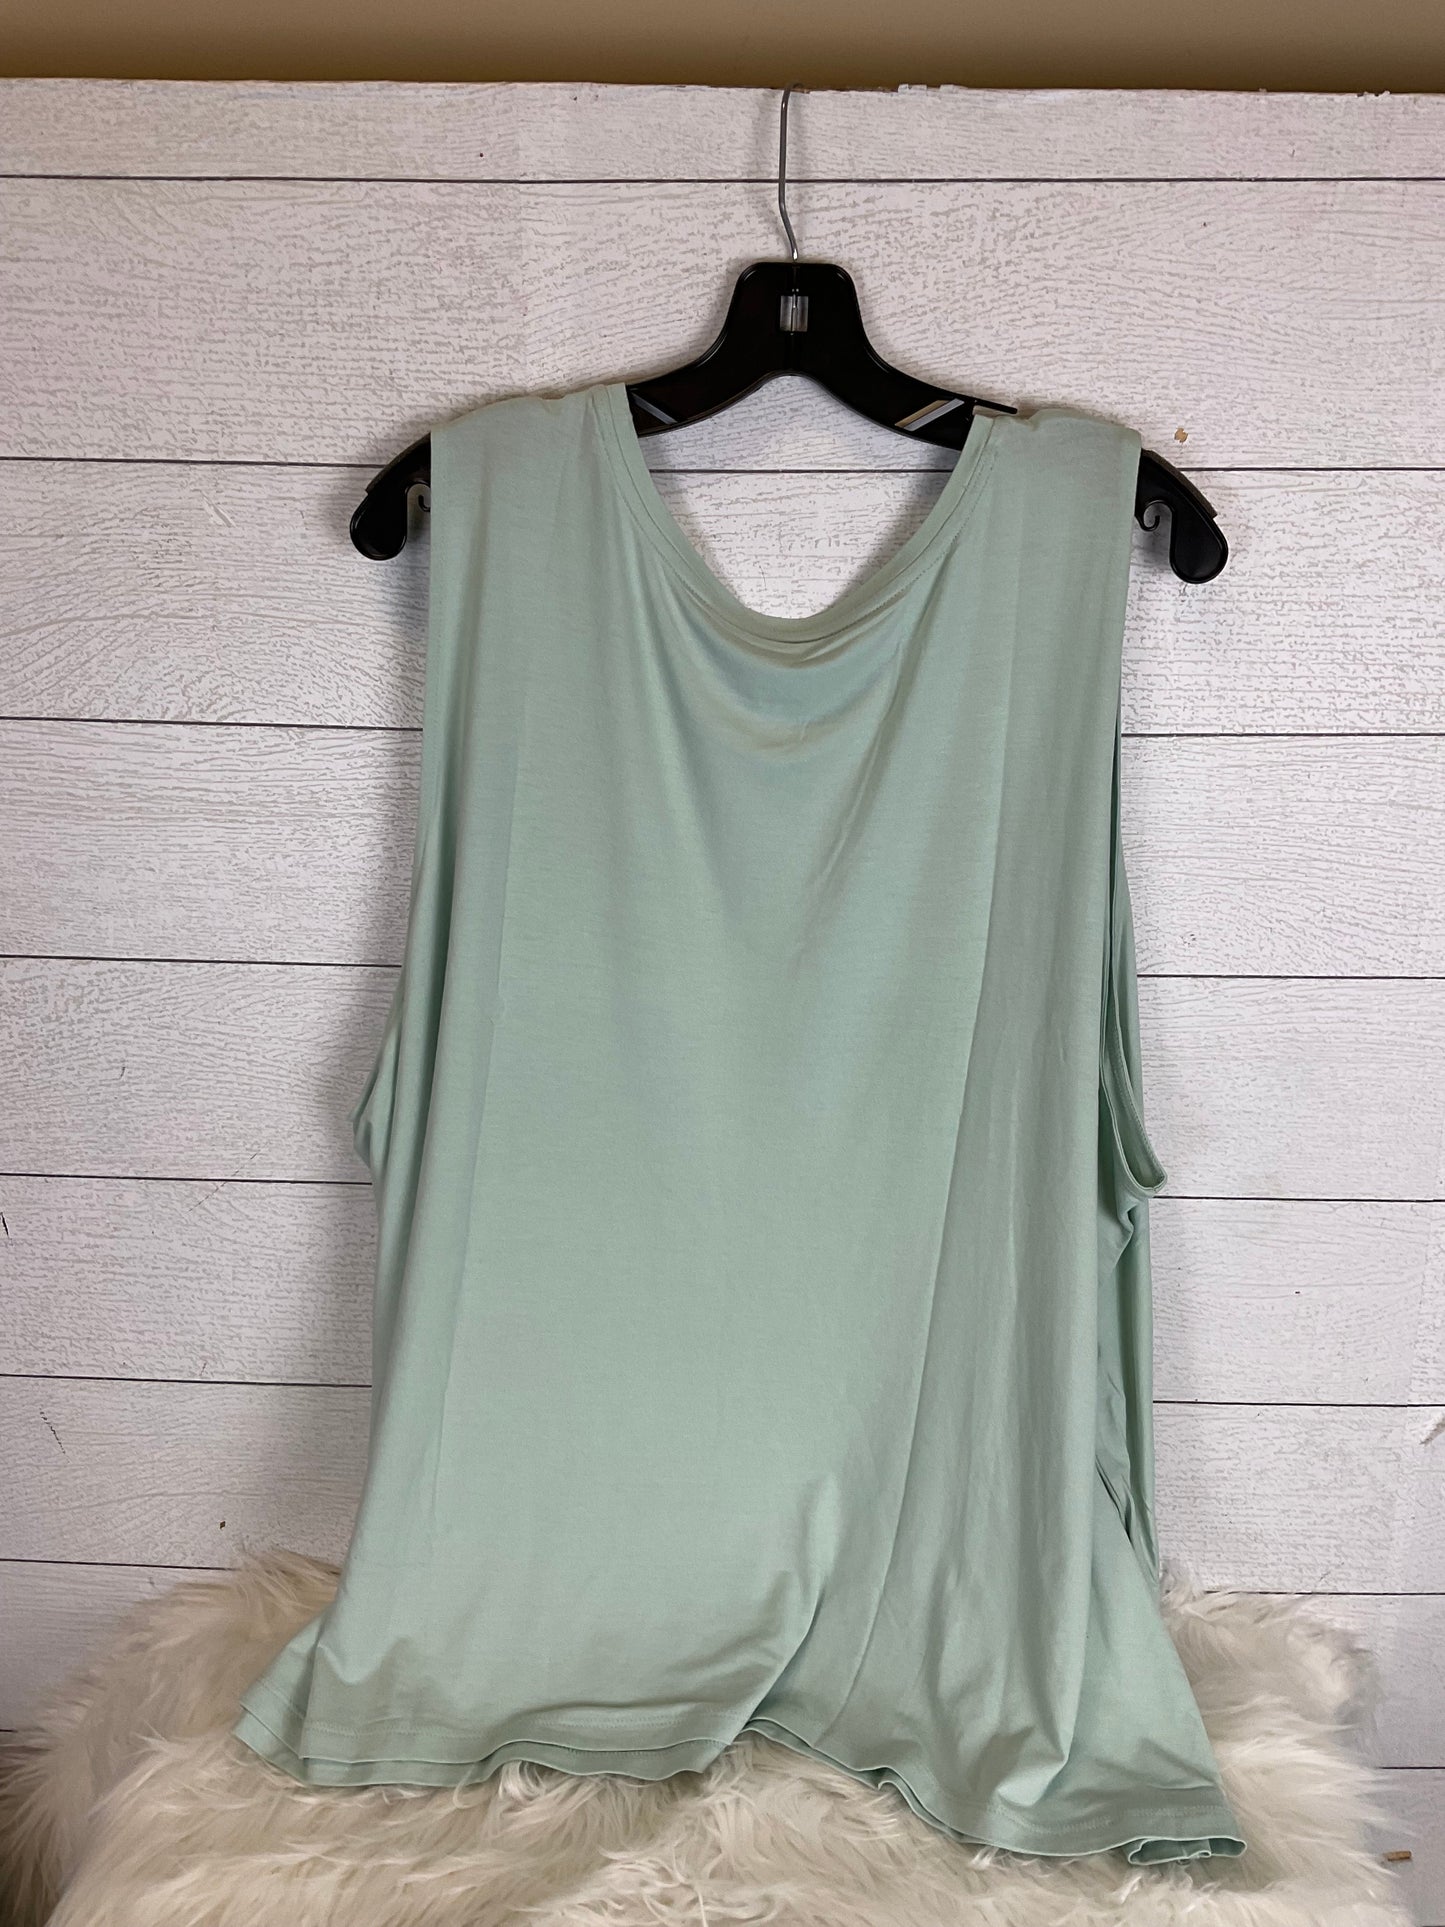 Blue Top Sleeveless A New Day, Size 4x